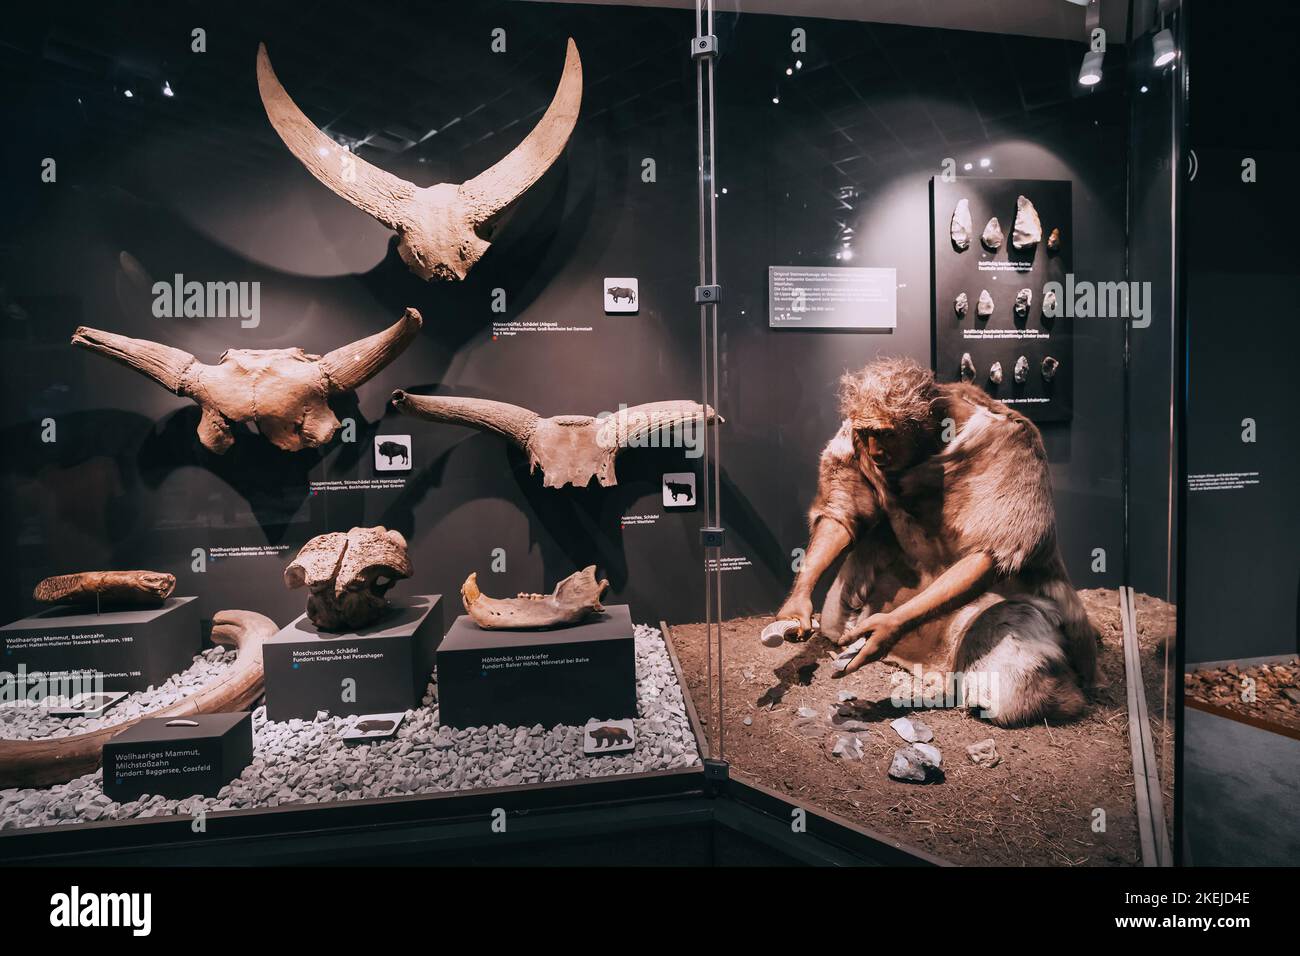 26 July 2022, Munster, Germany: The figure of a Neanderthal and an ancient hunter working with stone tools in the Museum of Natural History Stock Photo